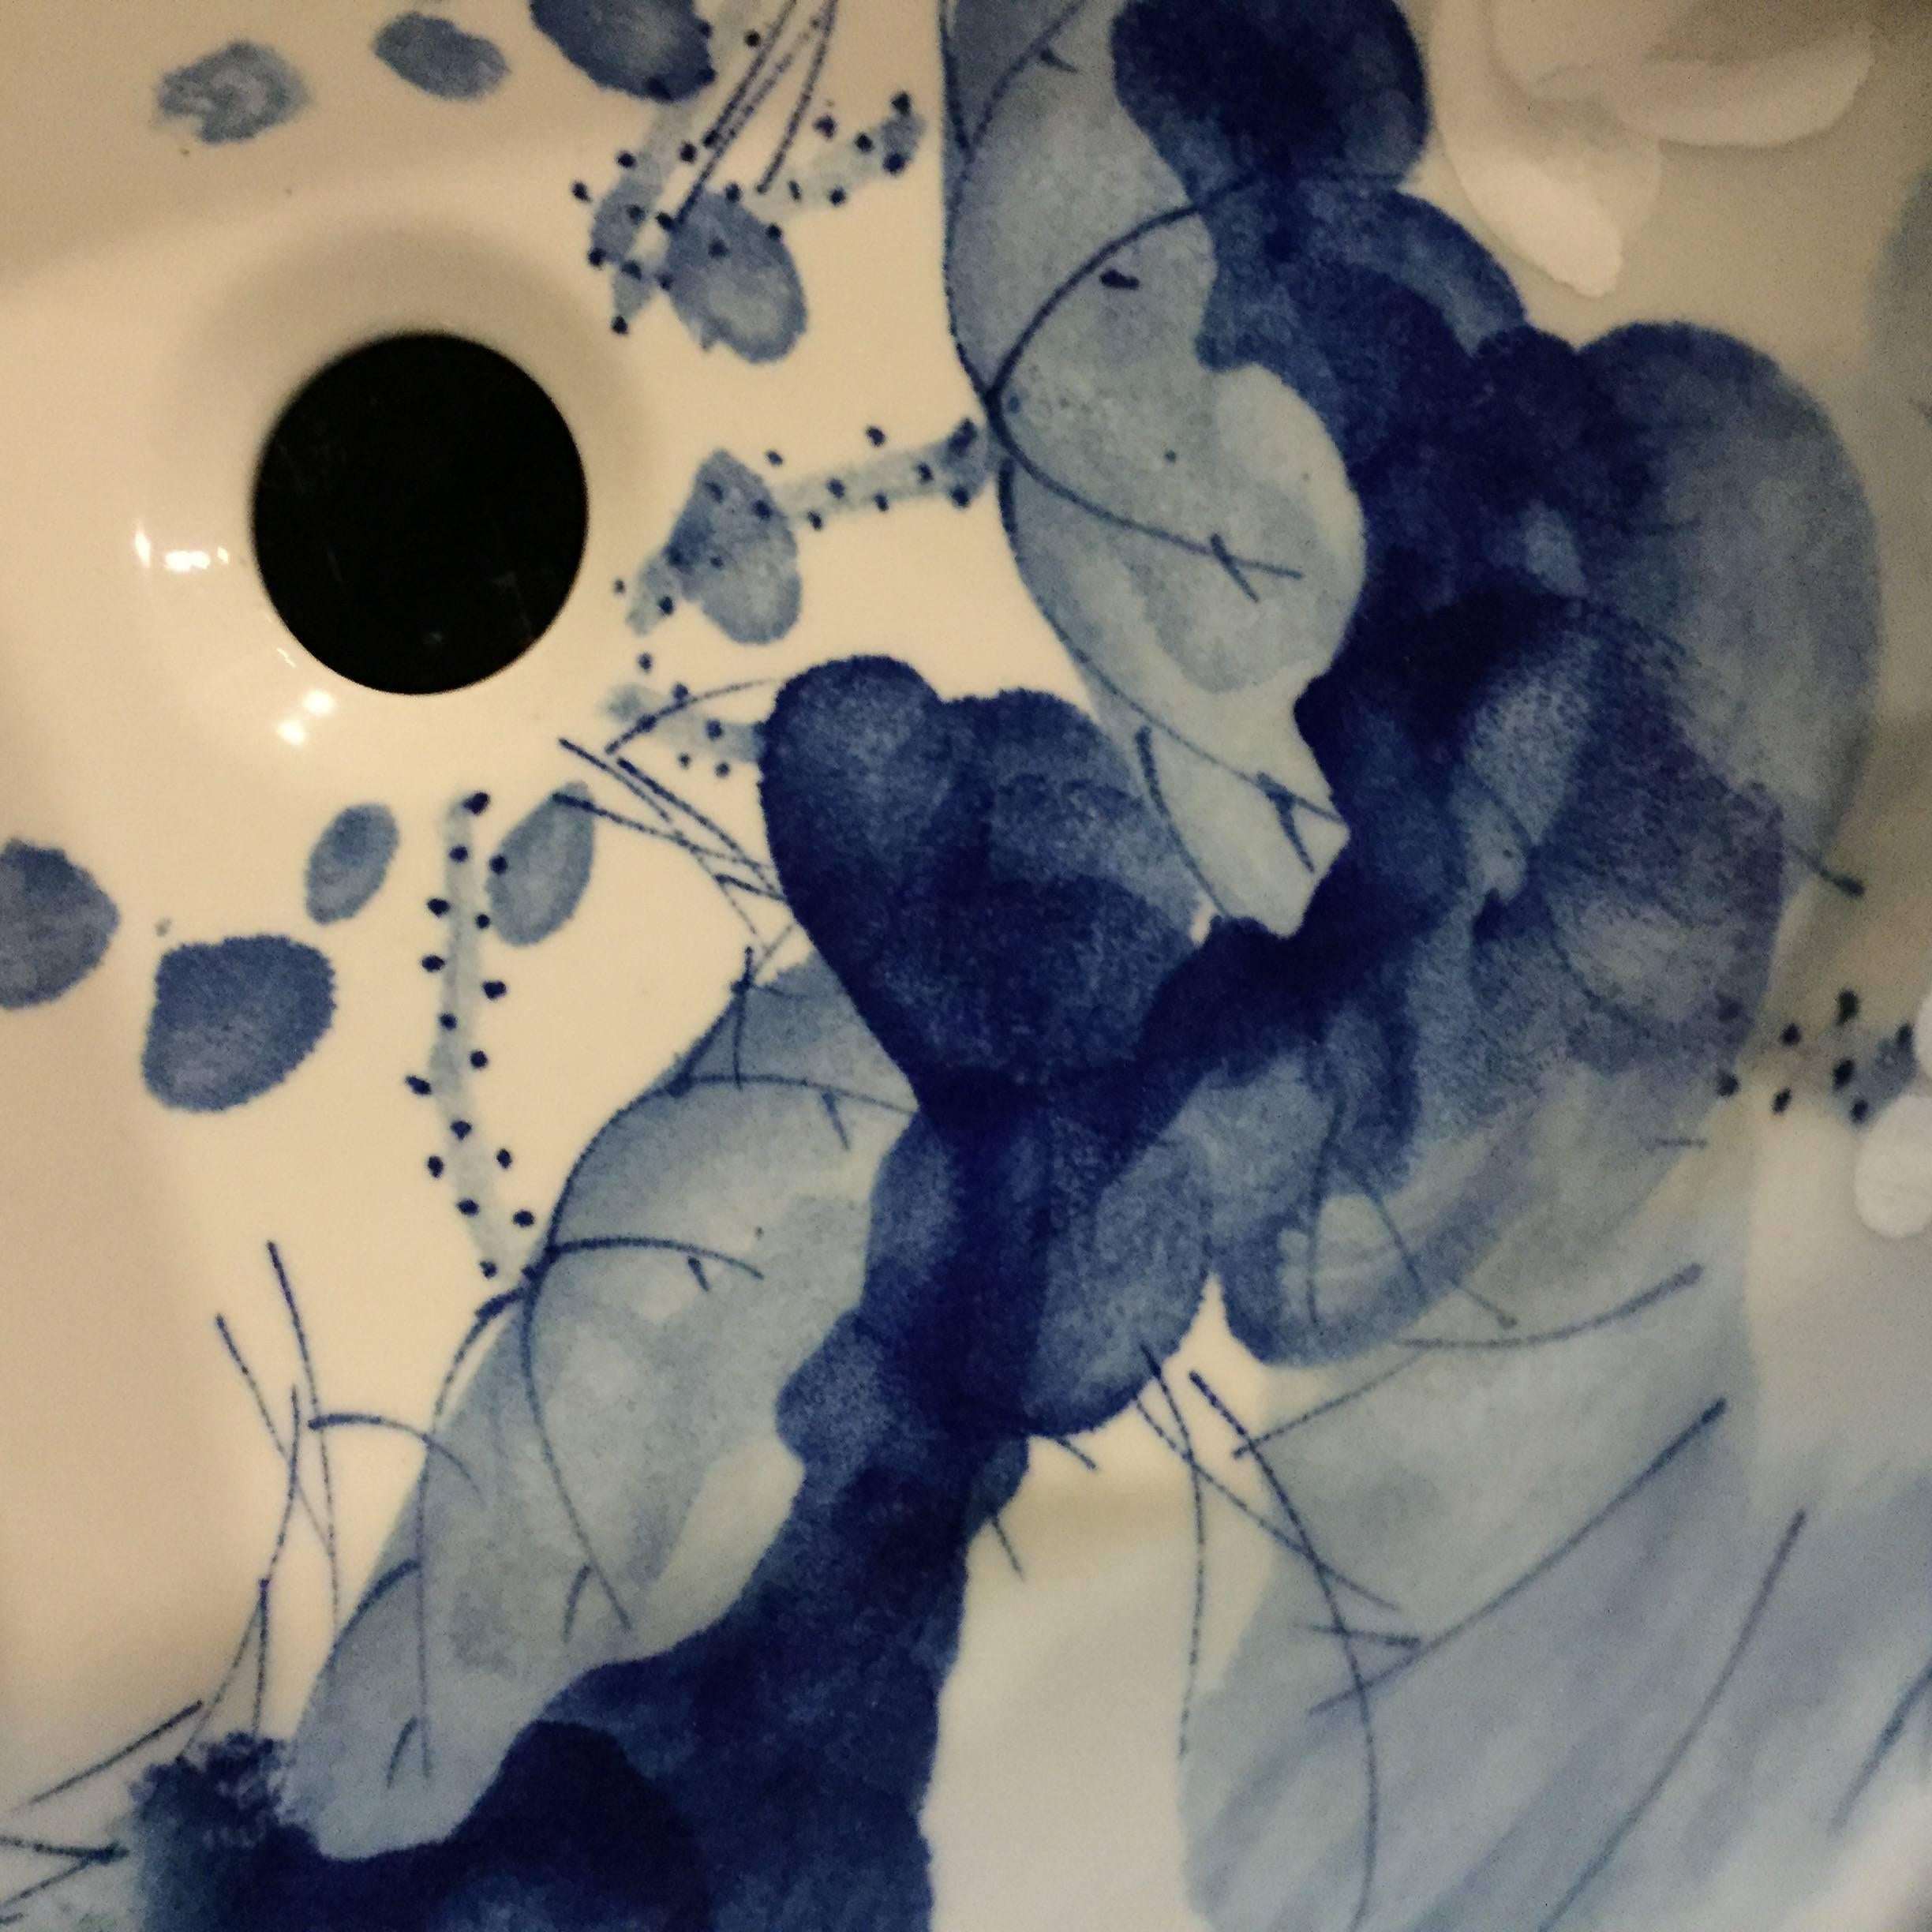 Pair of Blue and White Ceramic Sinks, Hand-Painted 1